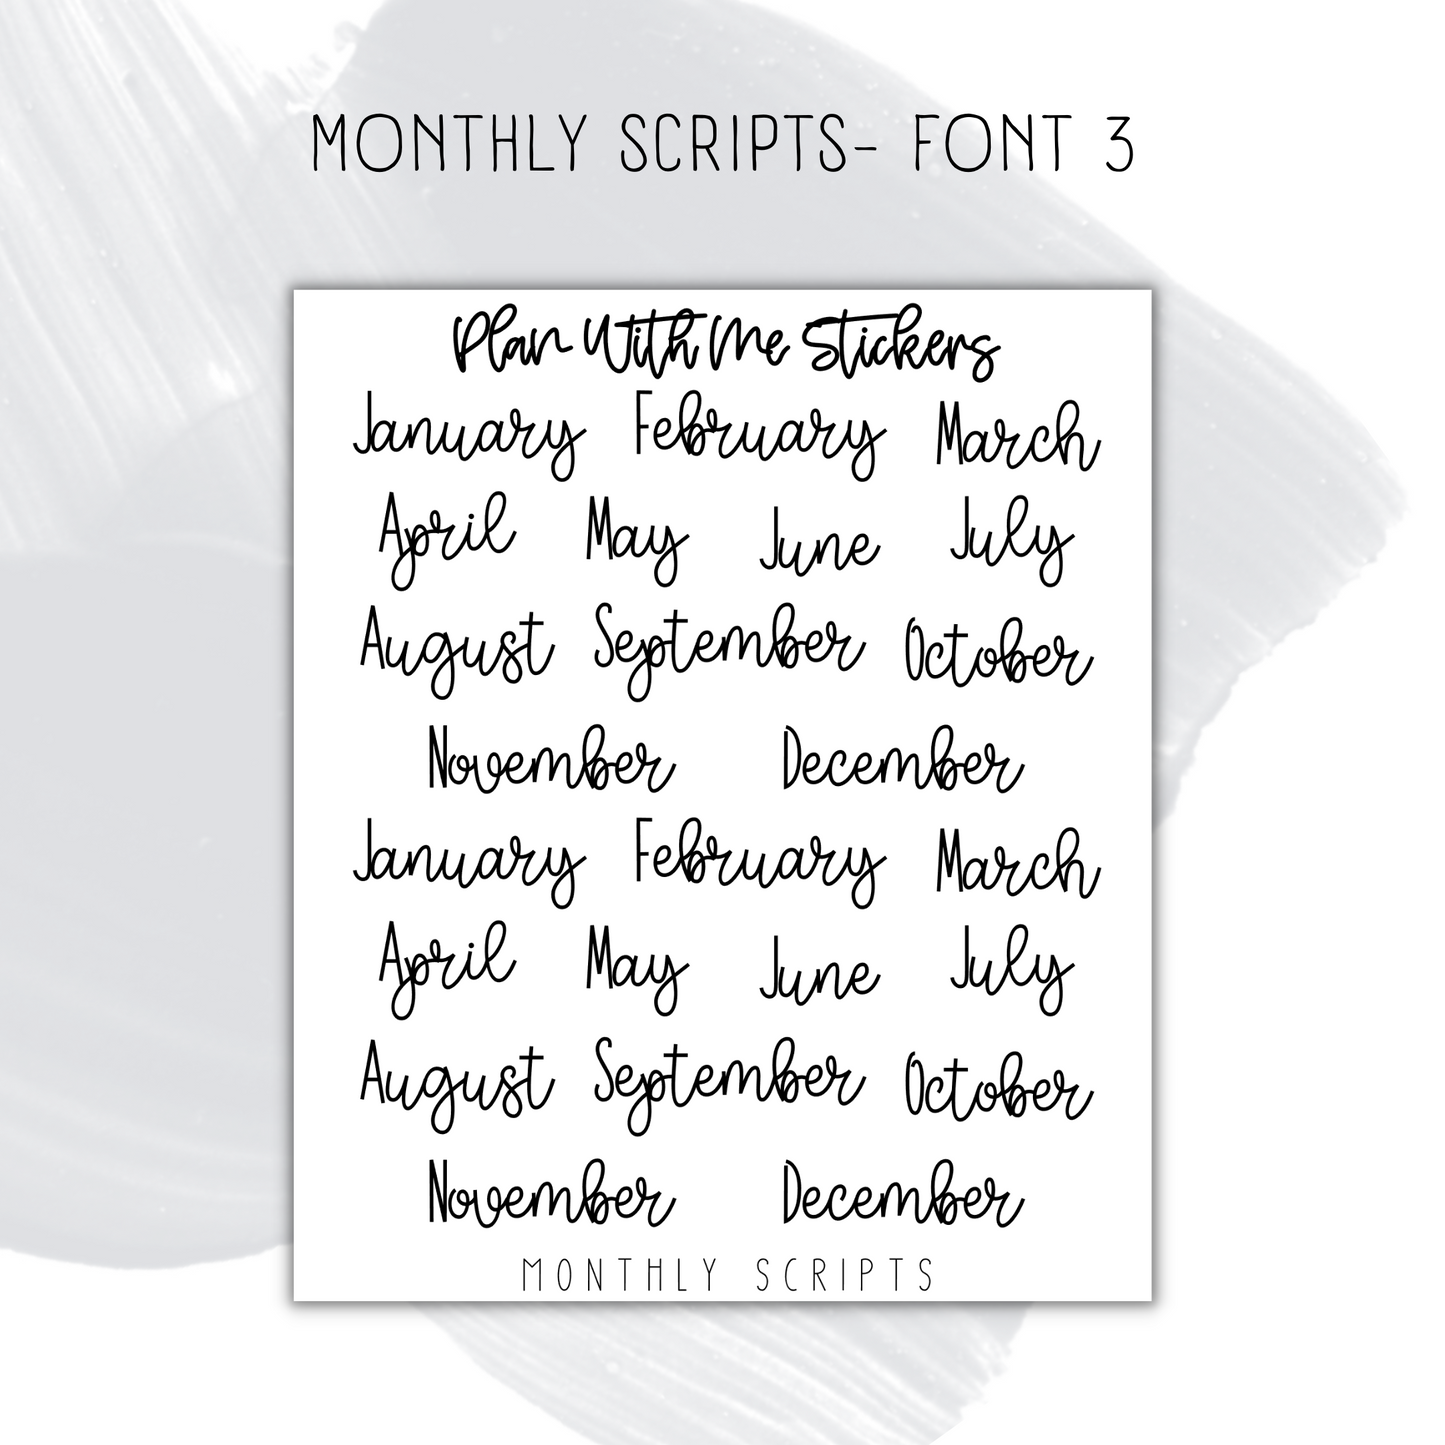 Monthly Scripts- Font 3